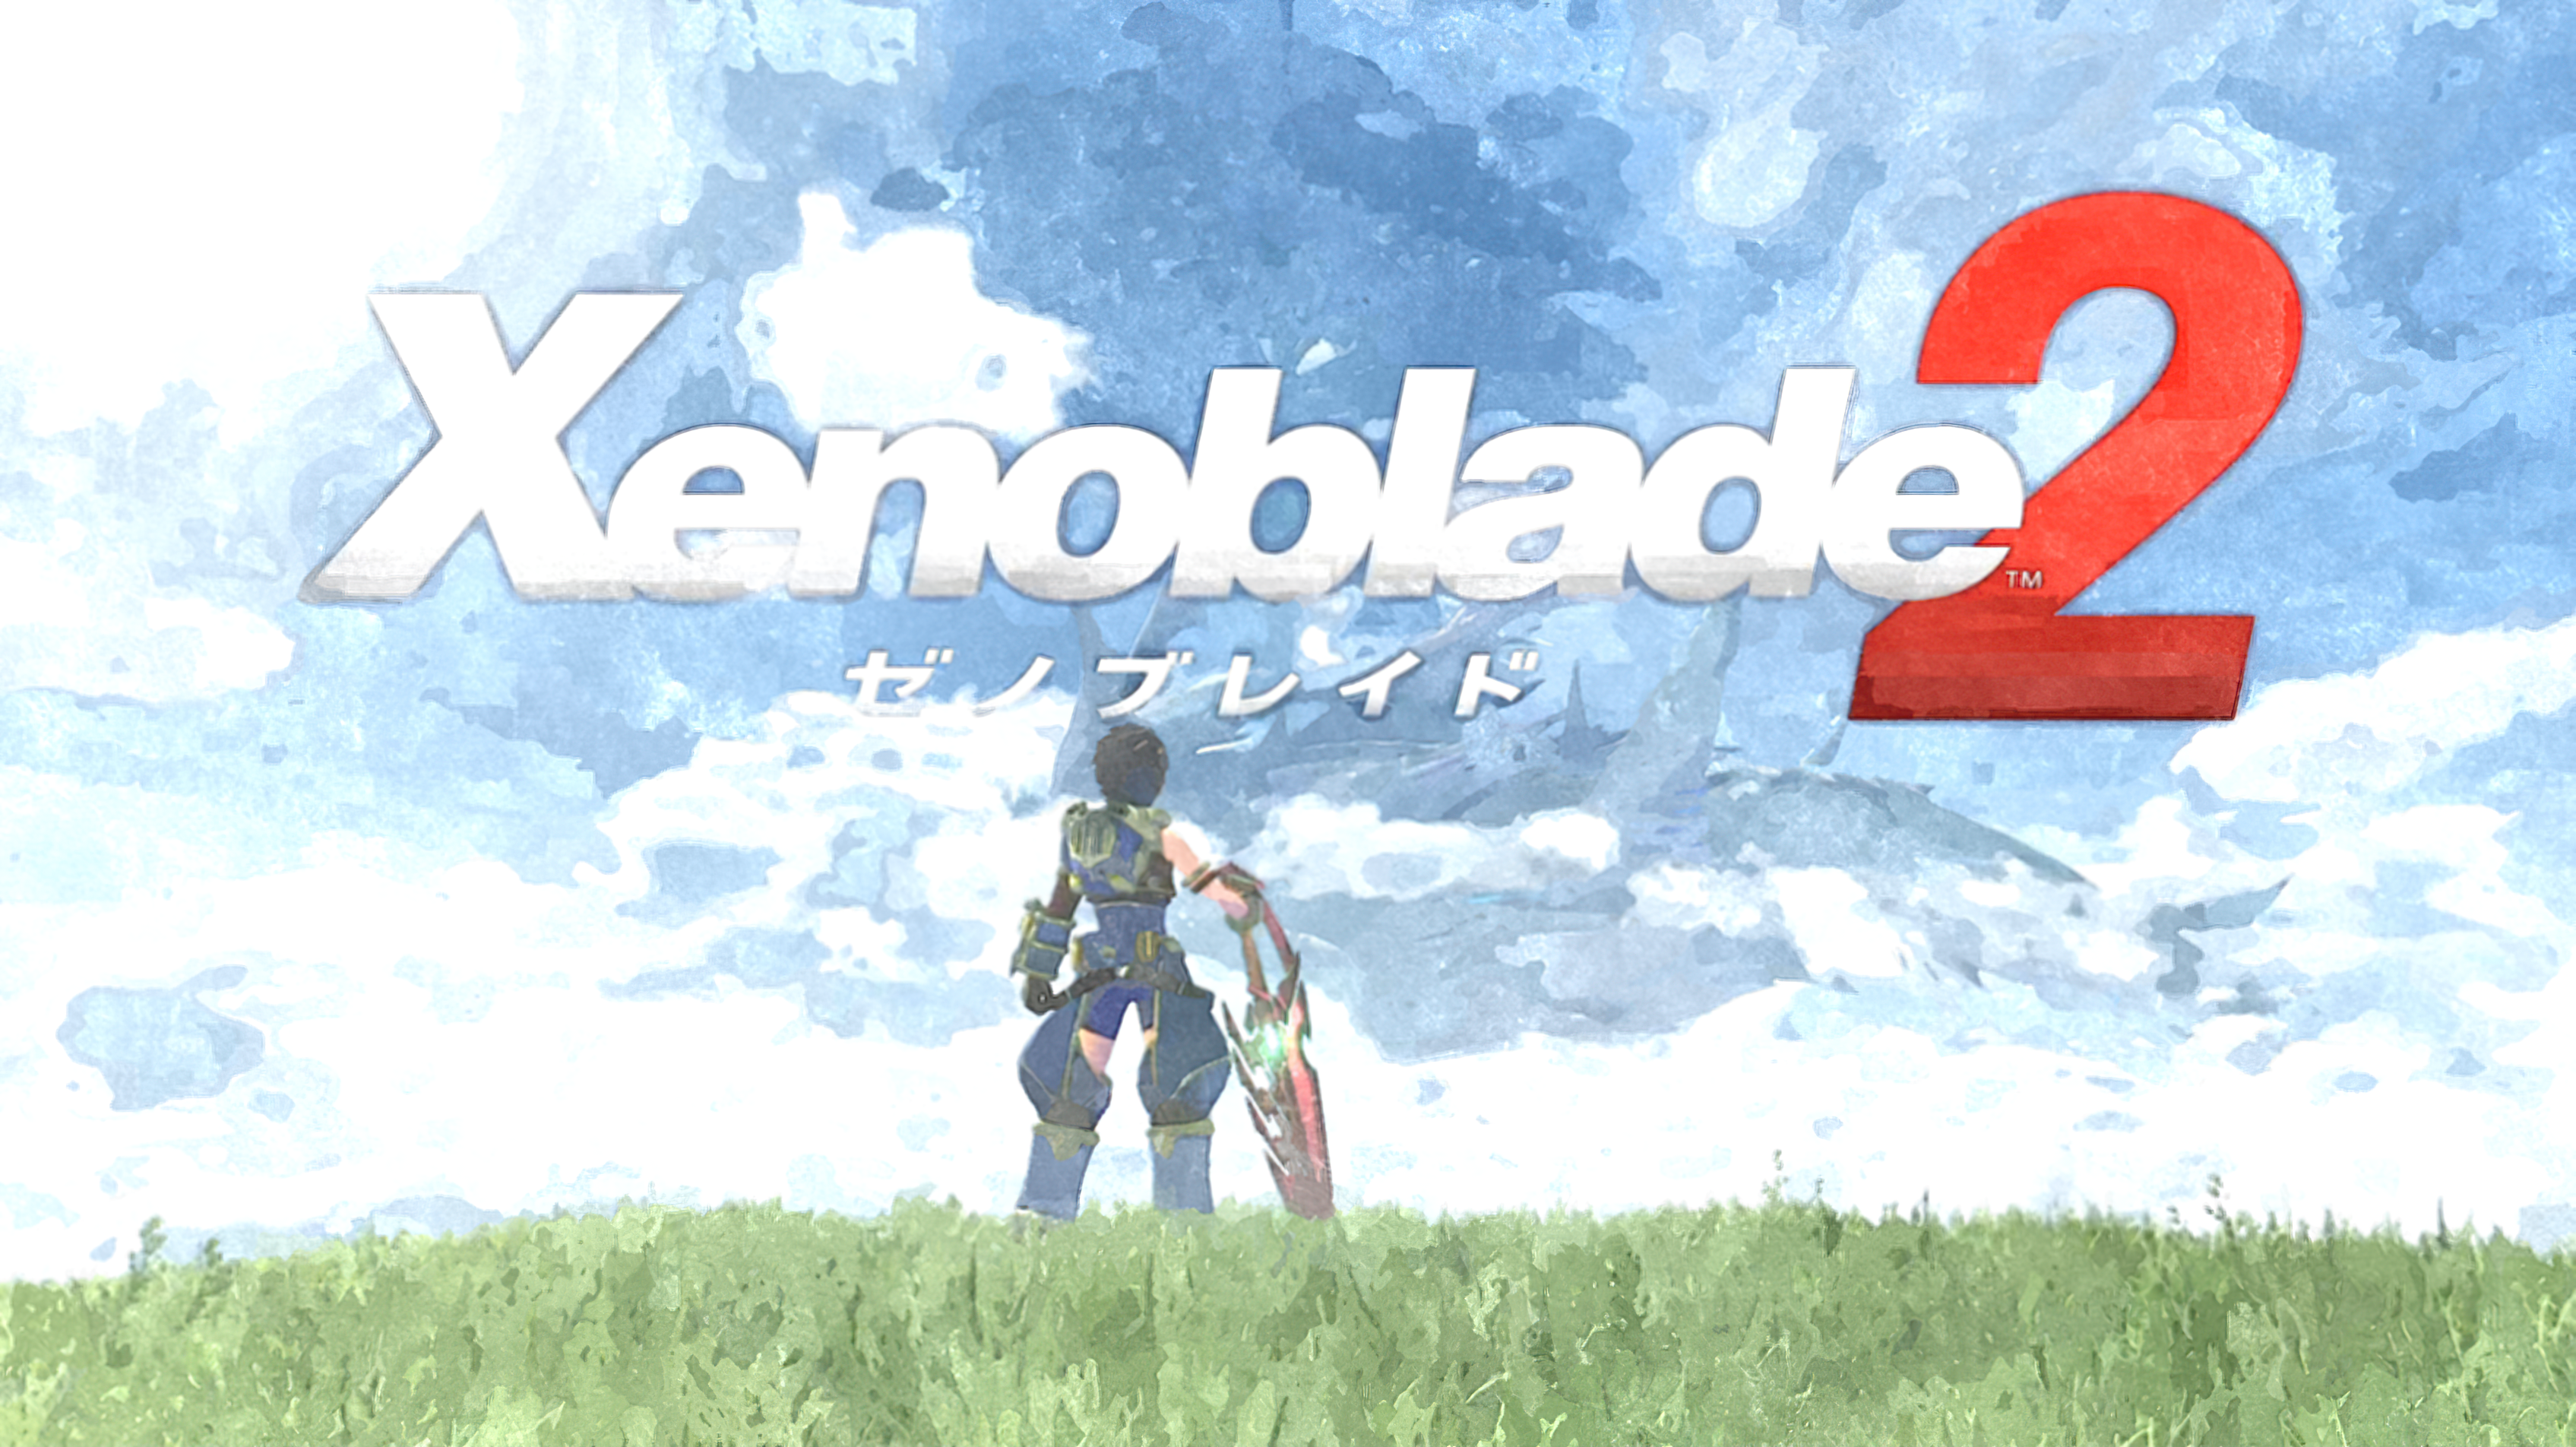 Video Game Xenoblade Chronicles 2 HD Wallpaper | Background Image